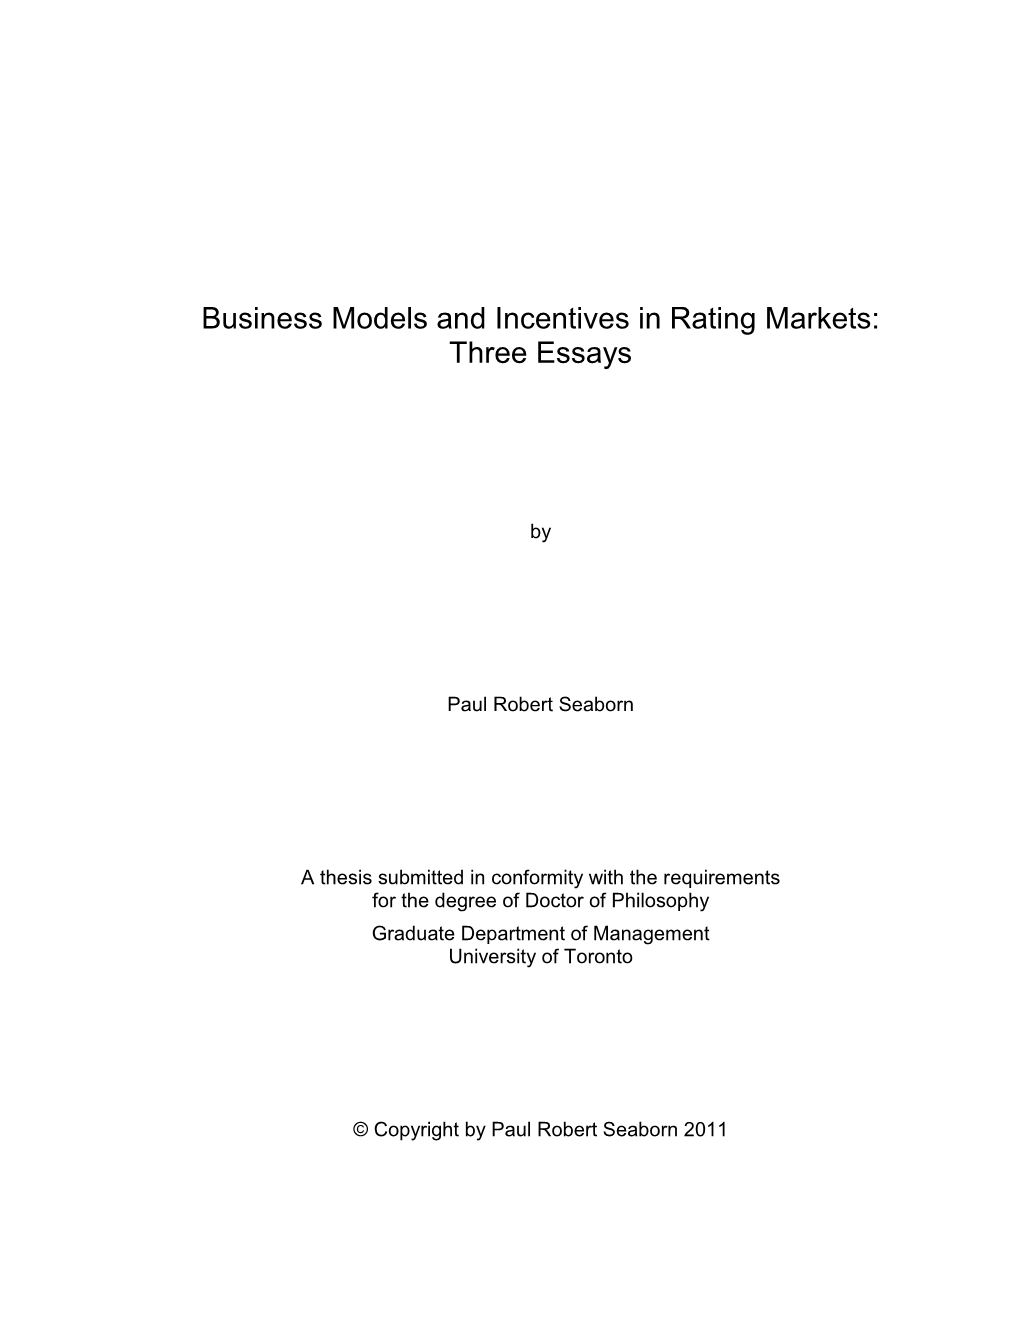 Business Models and Incentives in Rating Markets: Three Essays